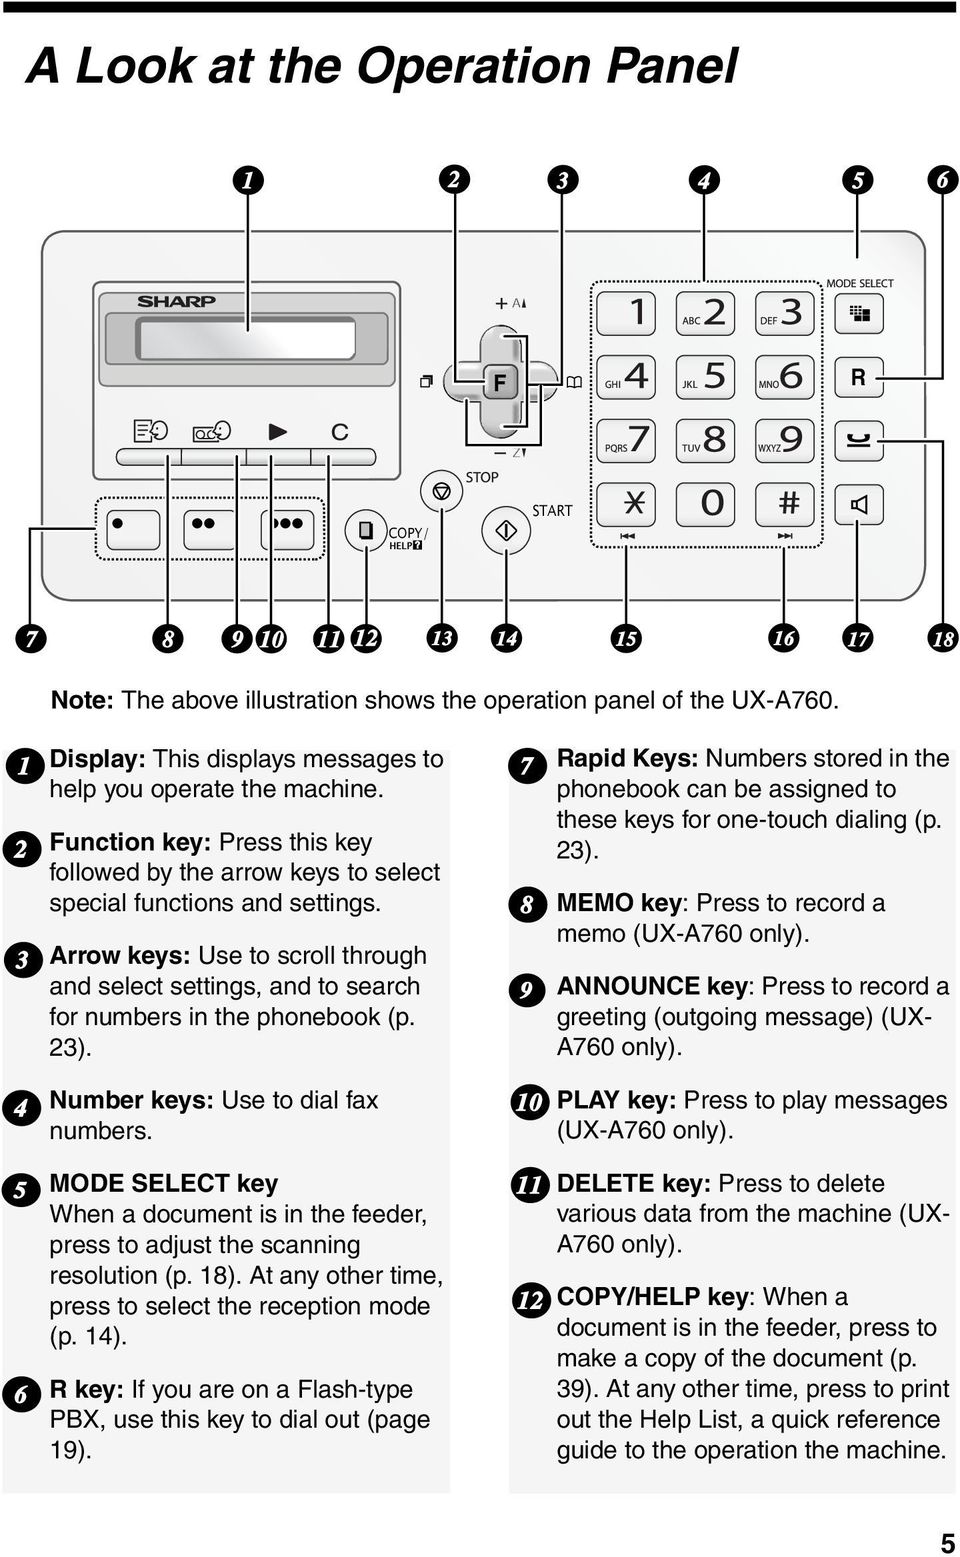 Arrow keys: Use to scroll through and select settings, and to search for numbers in the phonebook (p. 23).